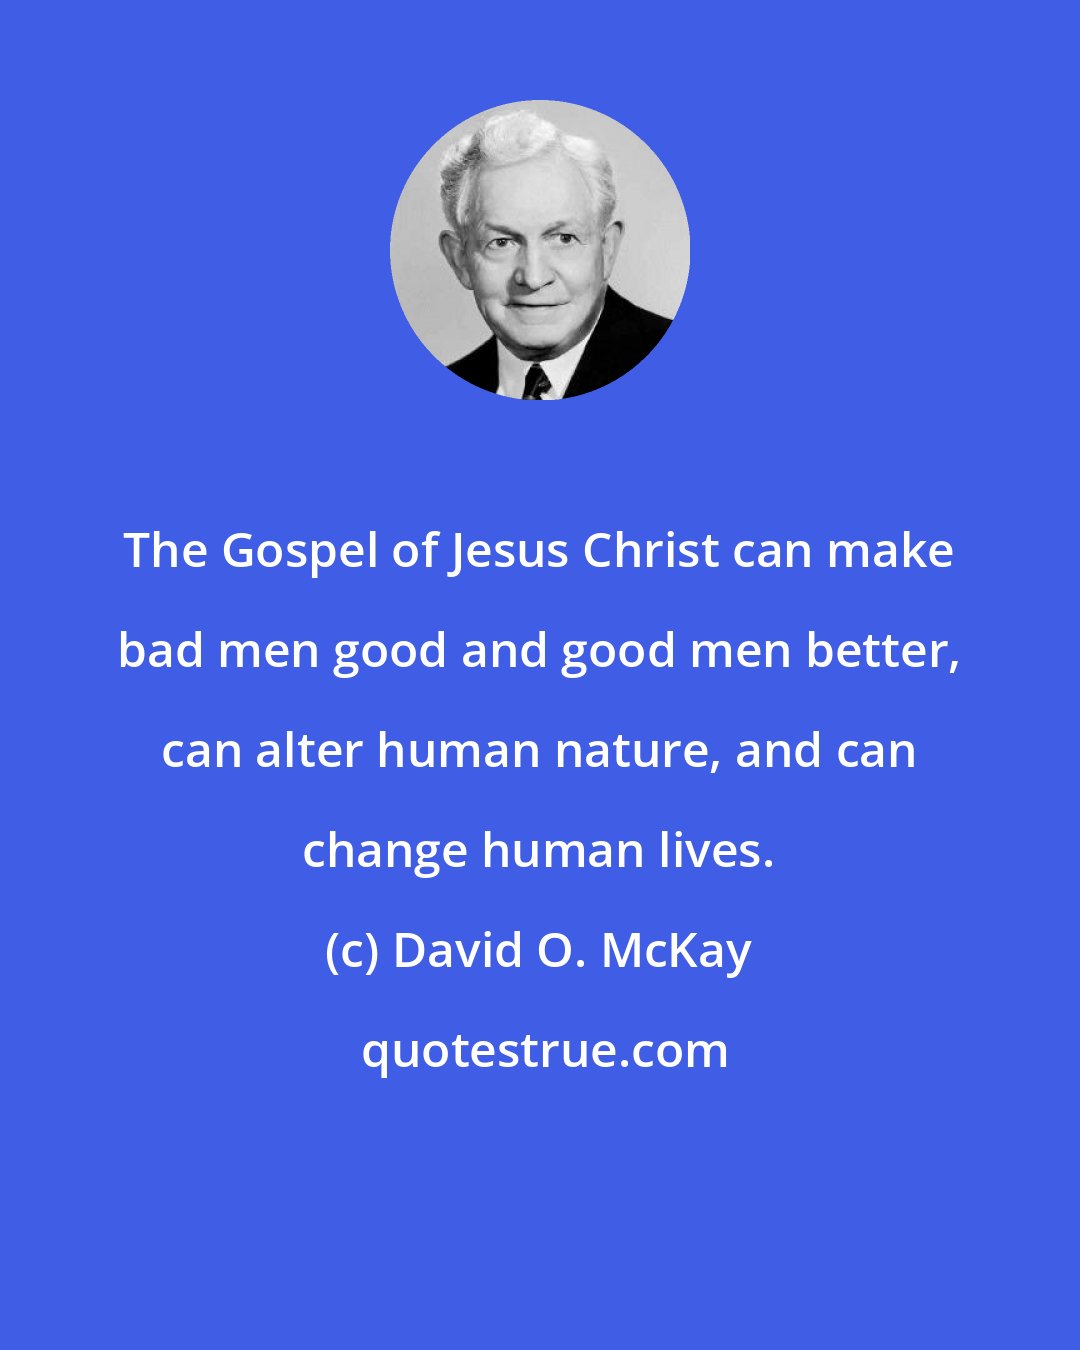 David O. McKay: The Gospel of Jesus Christ can make bad men good and good men better, can alter human nature, and can change human lives.